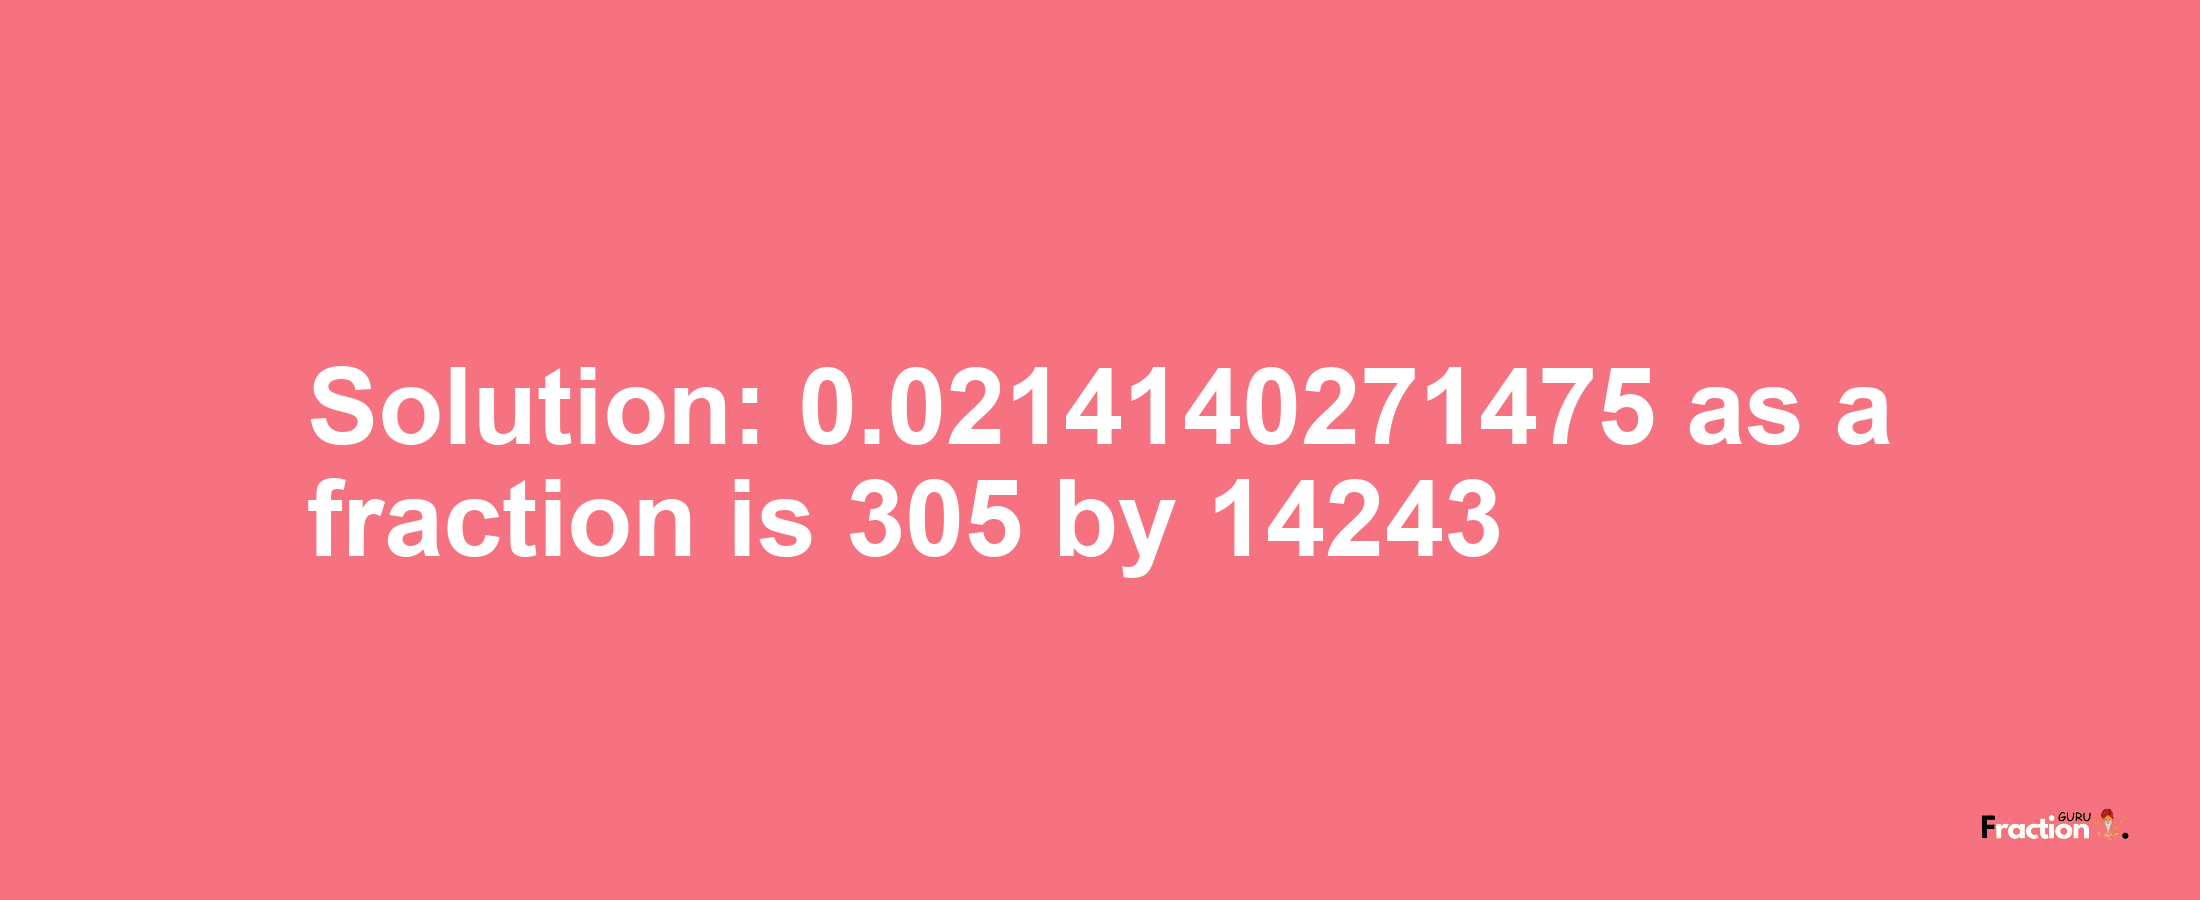 Solution:0.0214140271475 as a fraction is 305/14243